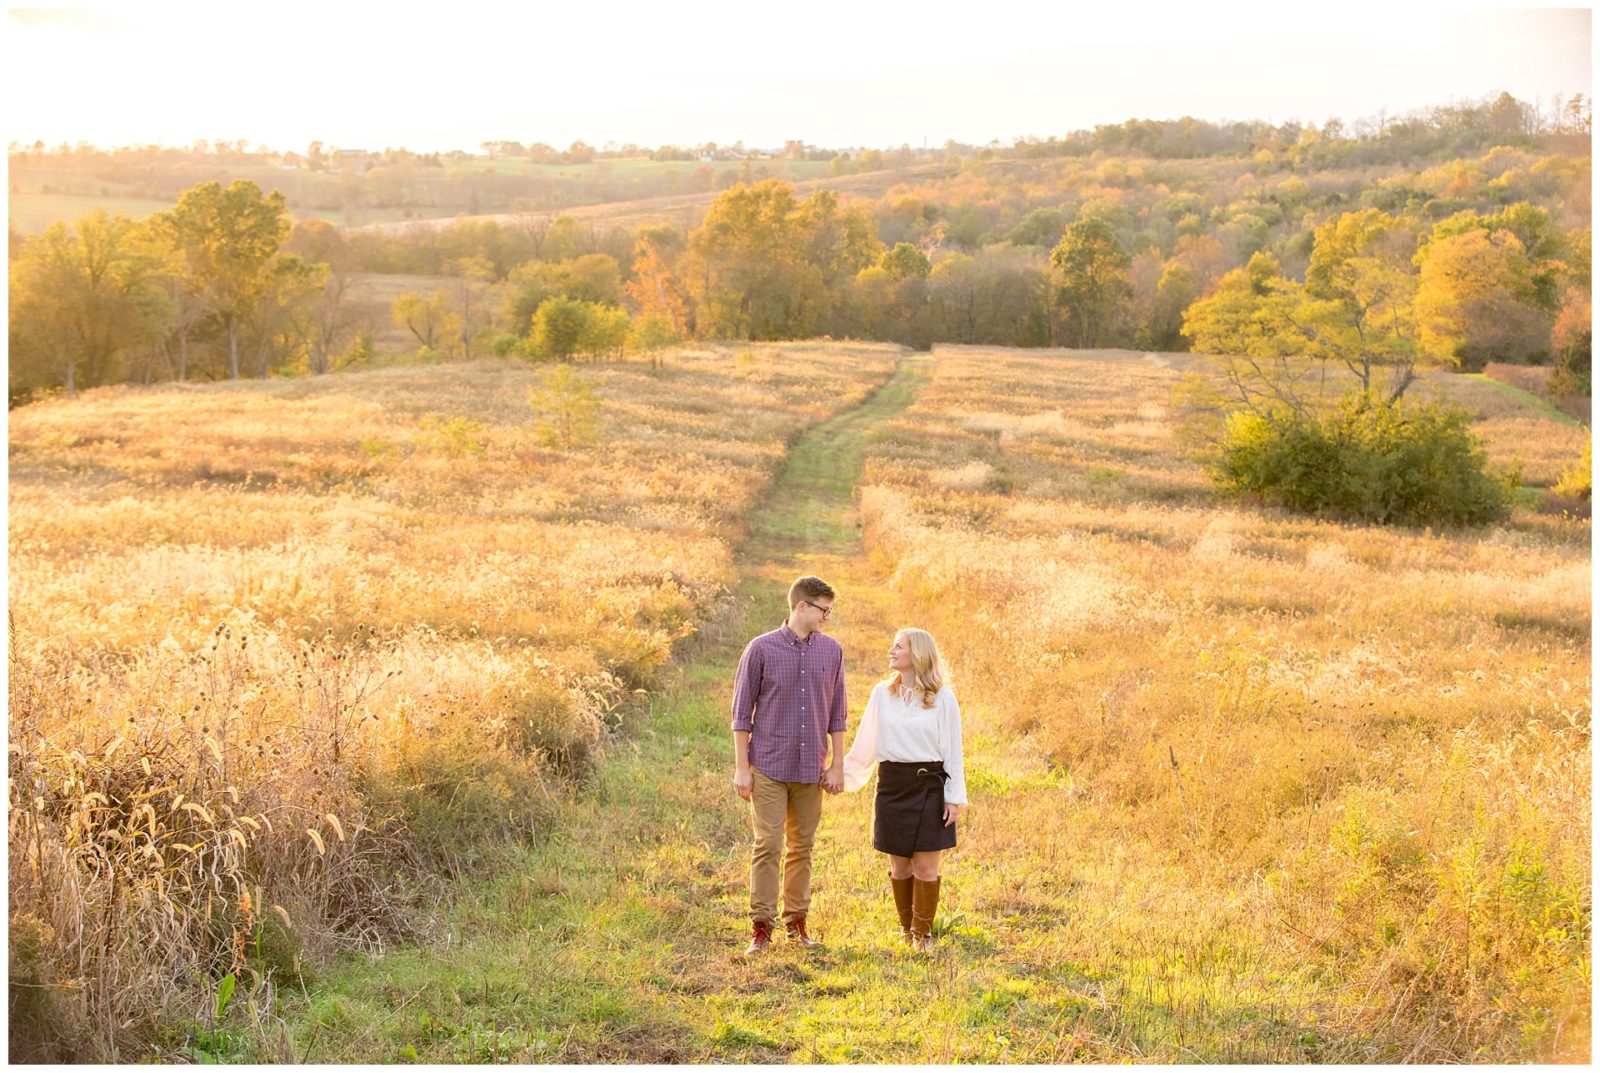 Sunset engagement session in a field at Shaker Village in Harrodsburg, Kentucky.